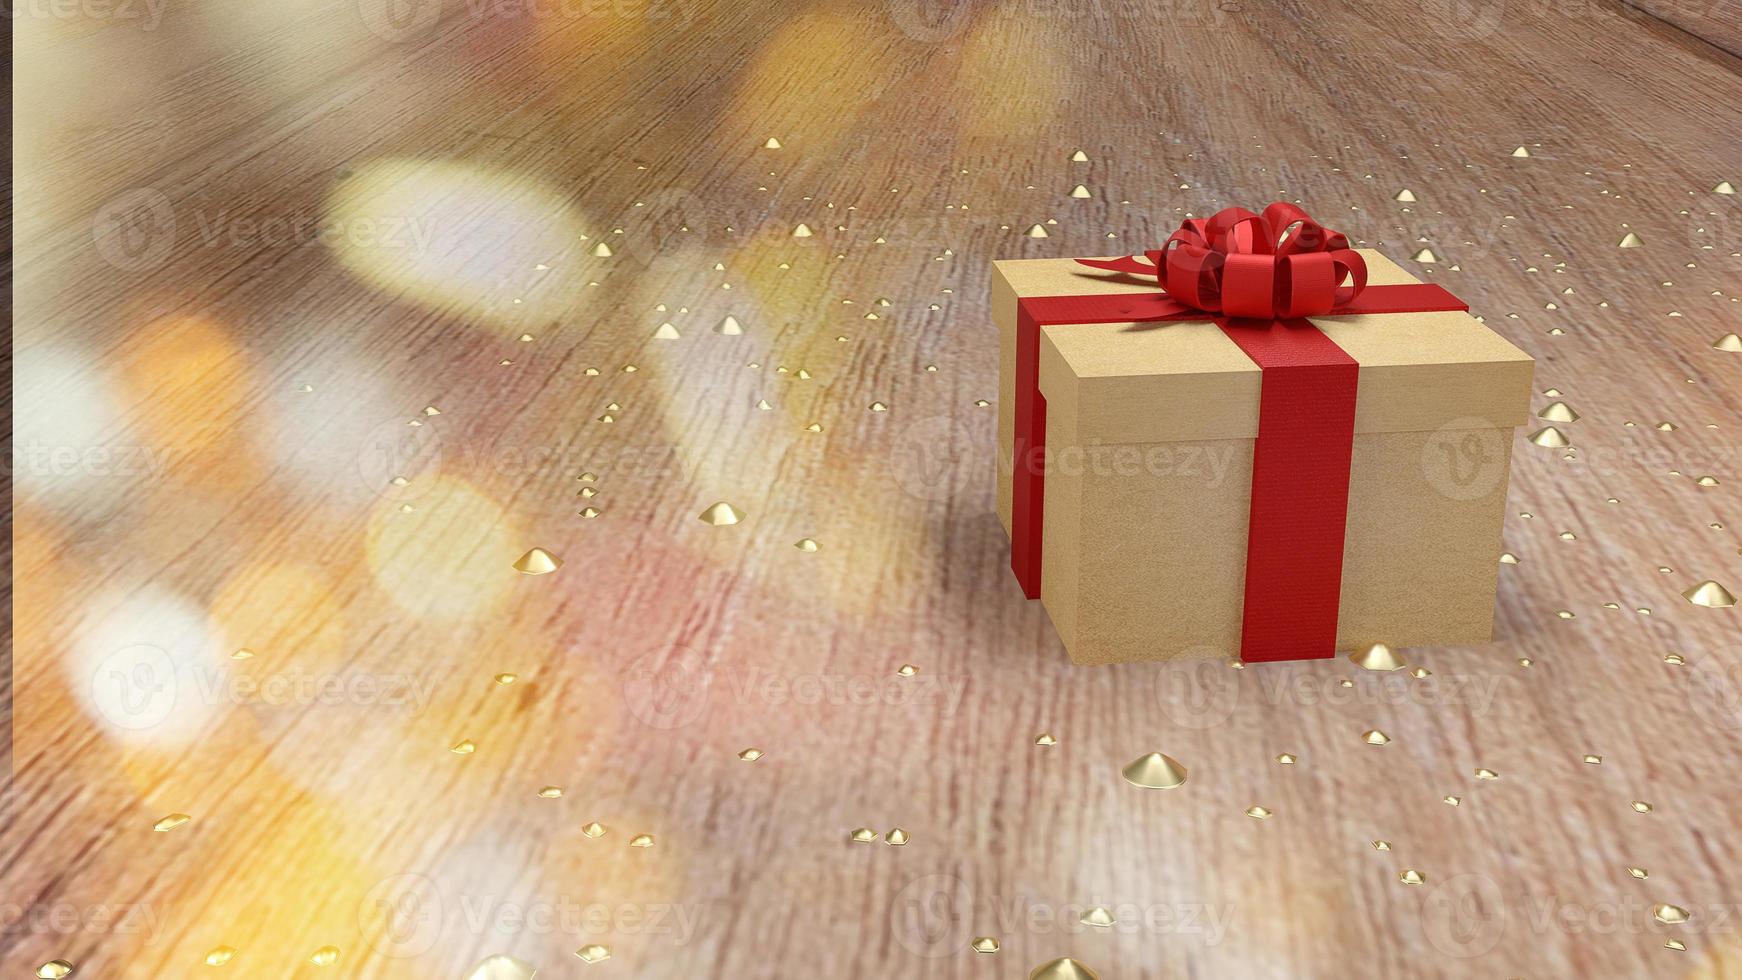 gift box  on. Wood table 3d rendering for holiday content. photo